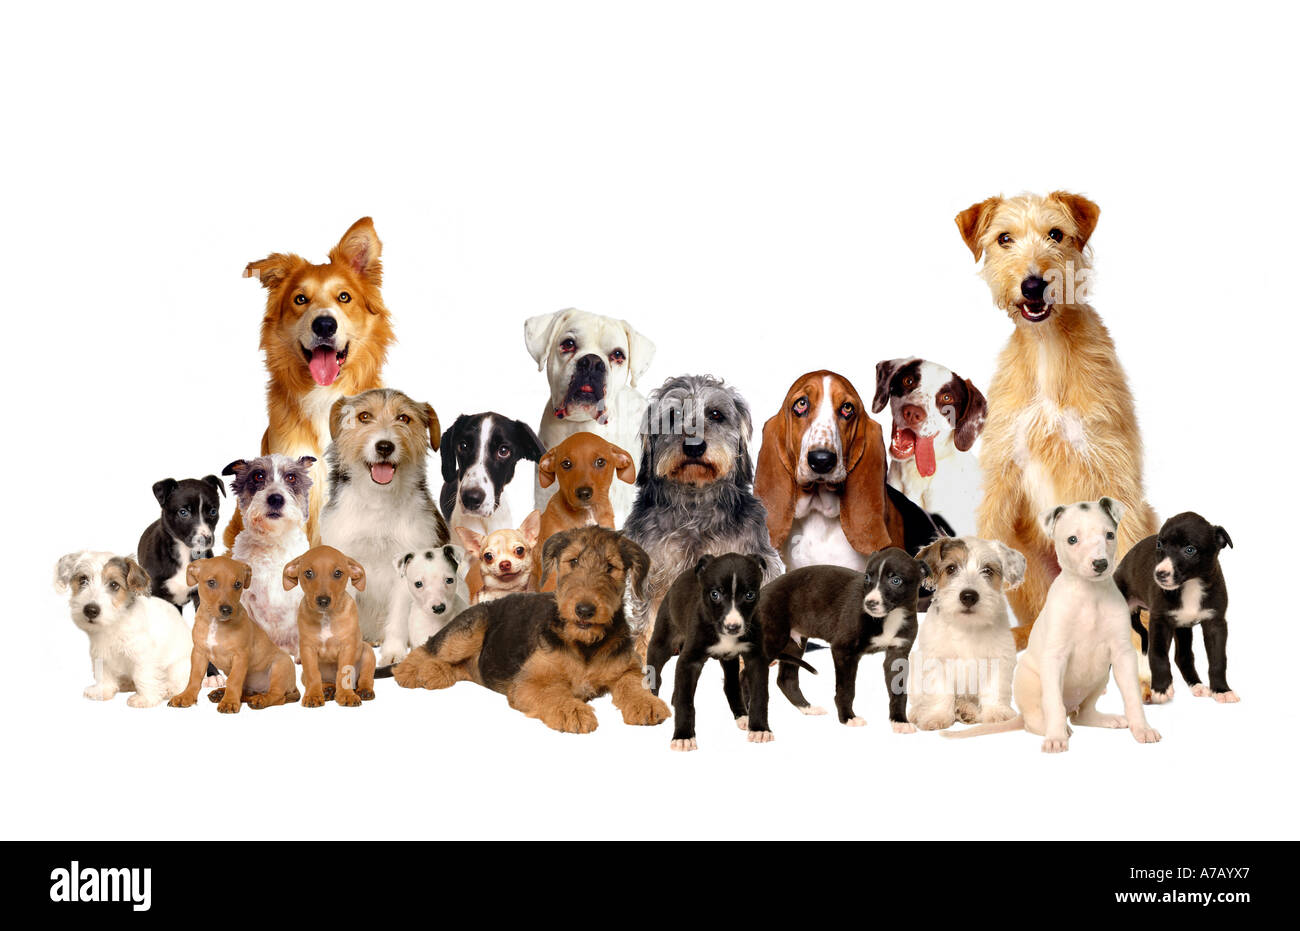 A COLLECTION OF DOGS Stock Photo